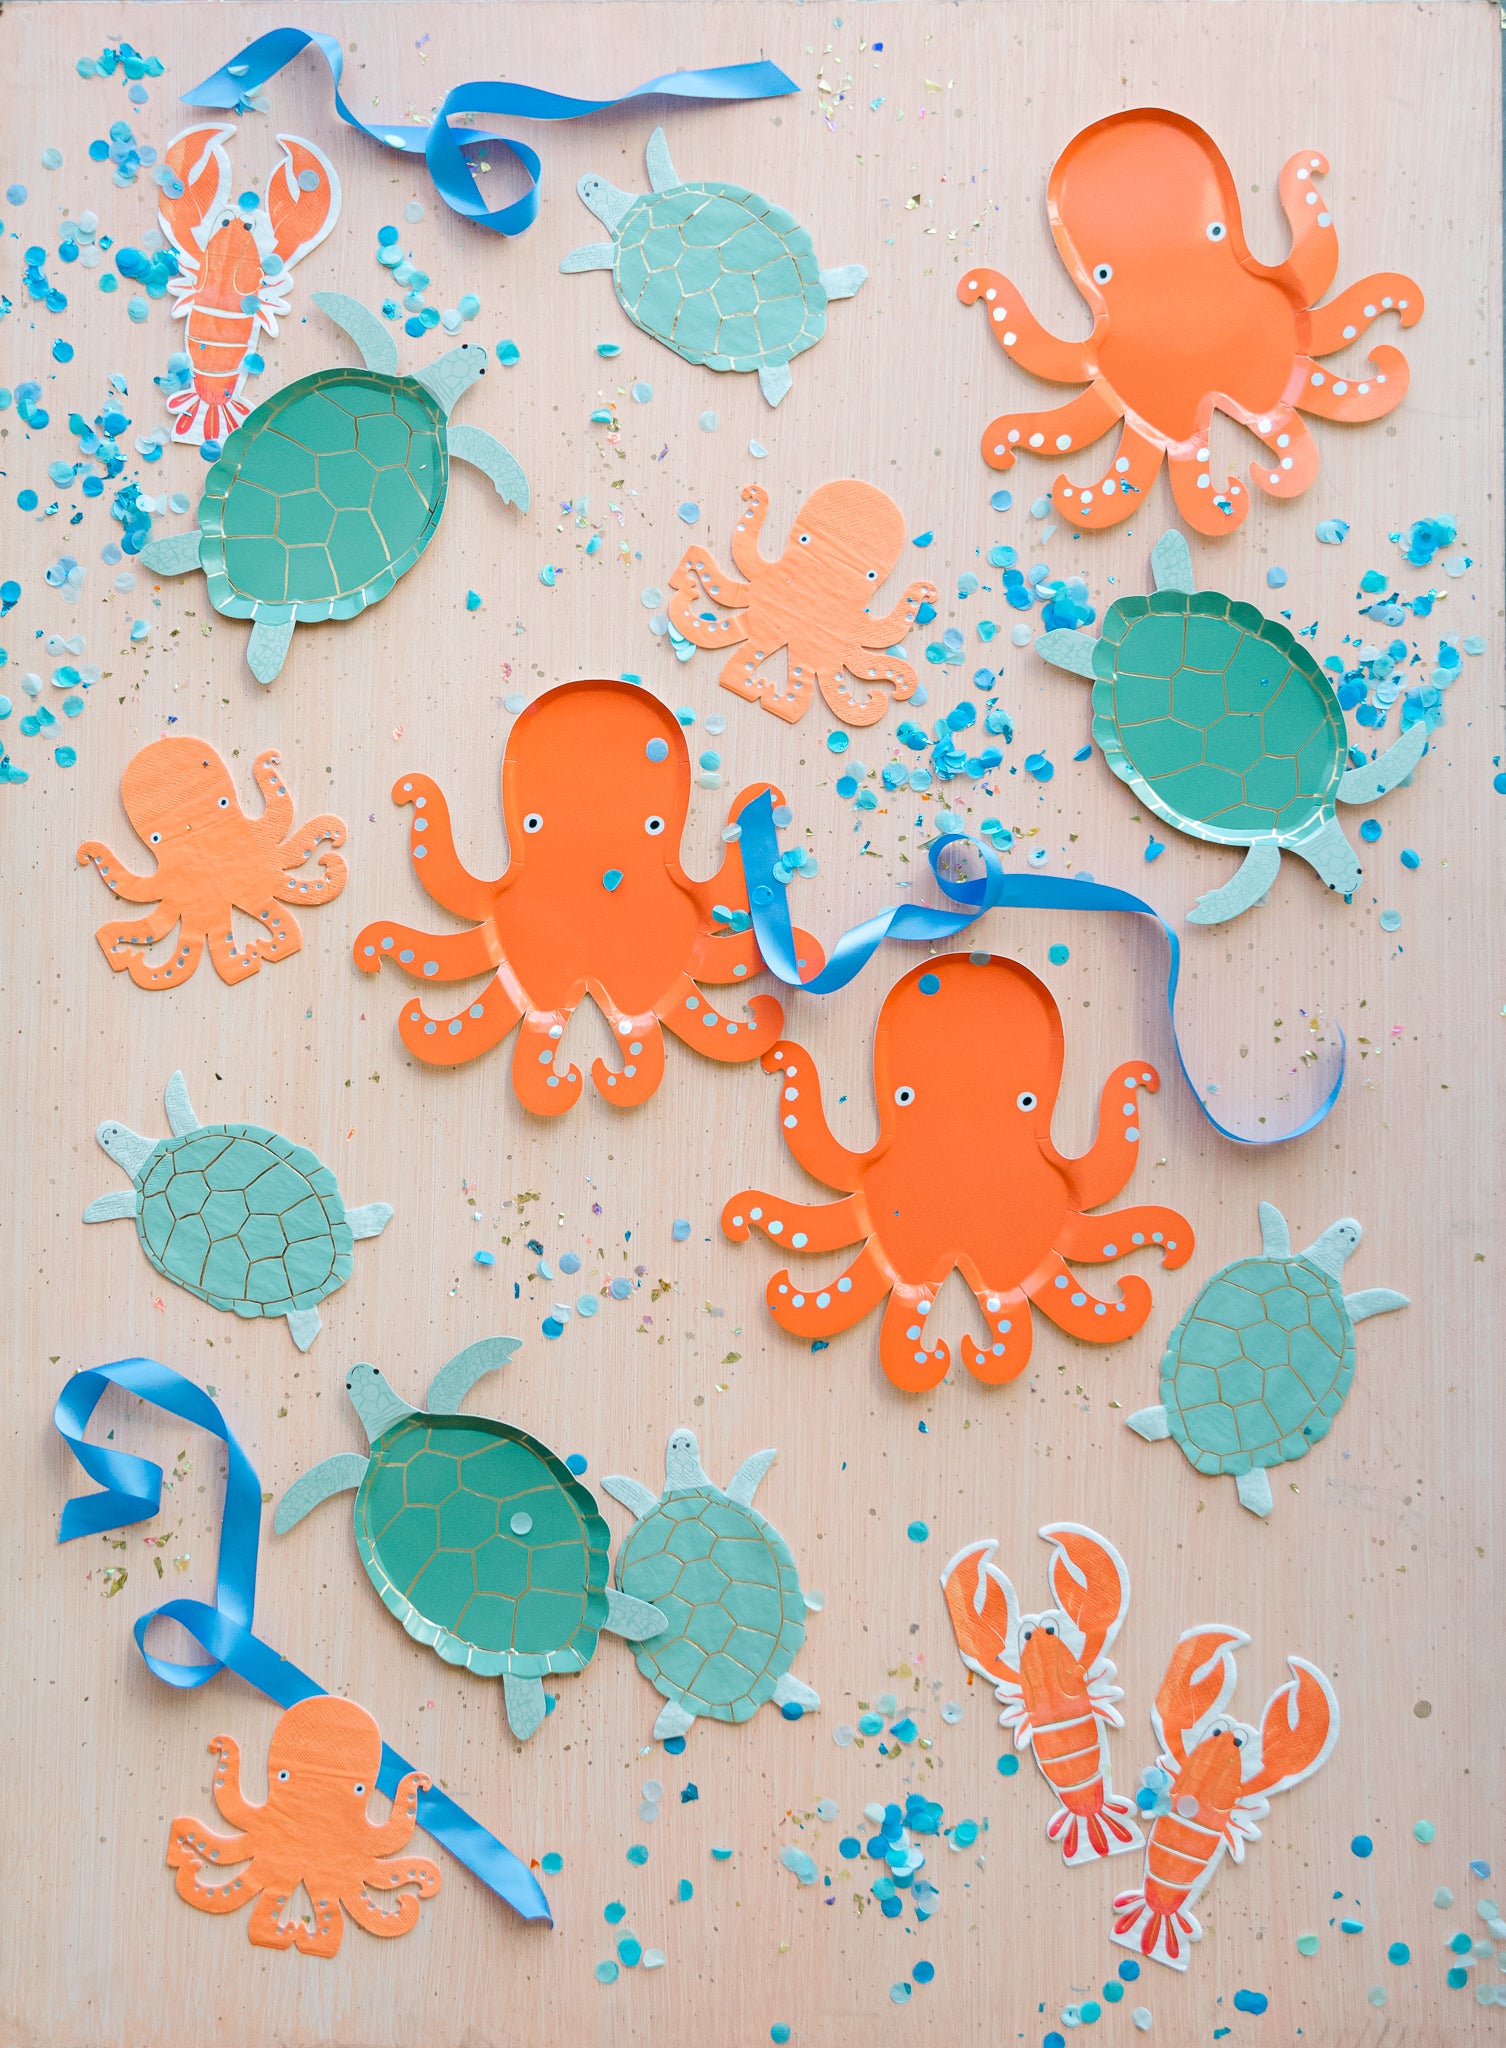 Under the sea theme party supplies for an under the sea birthday!